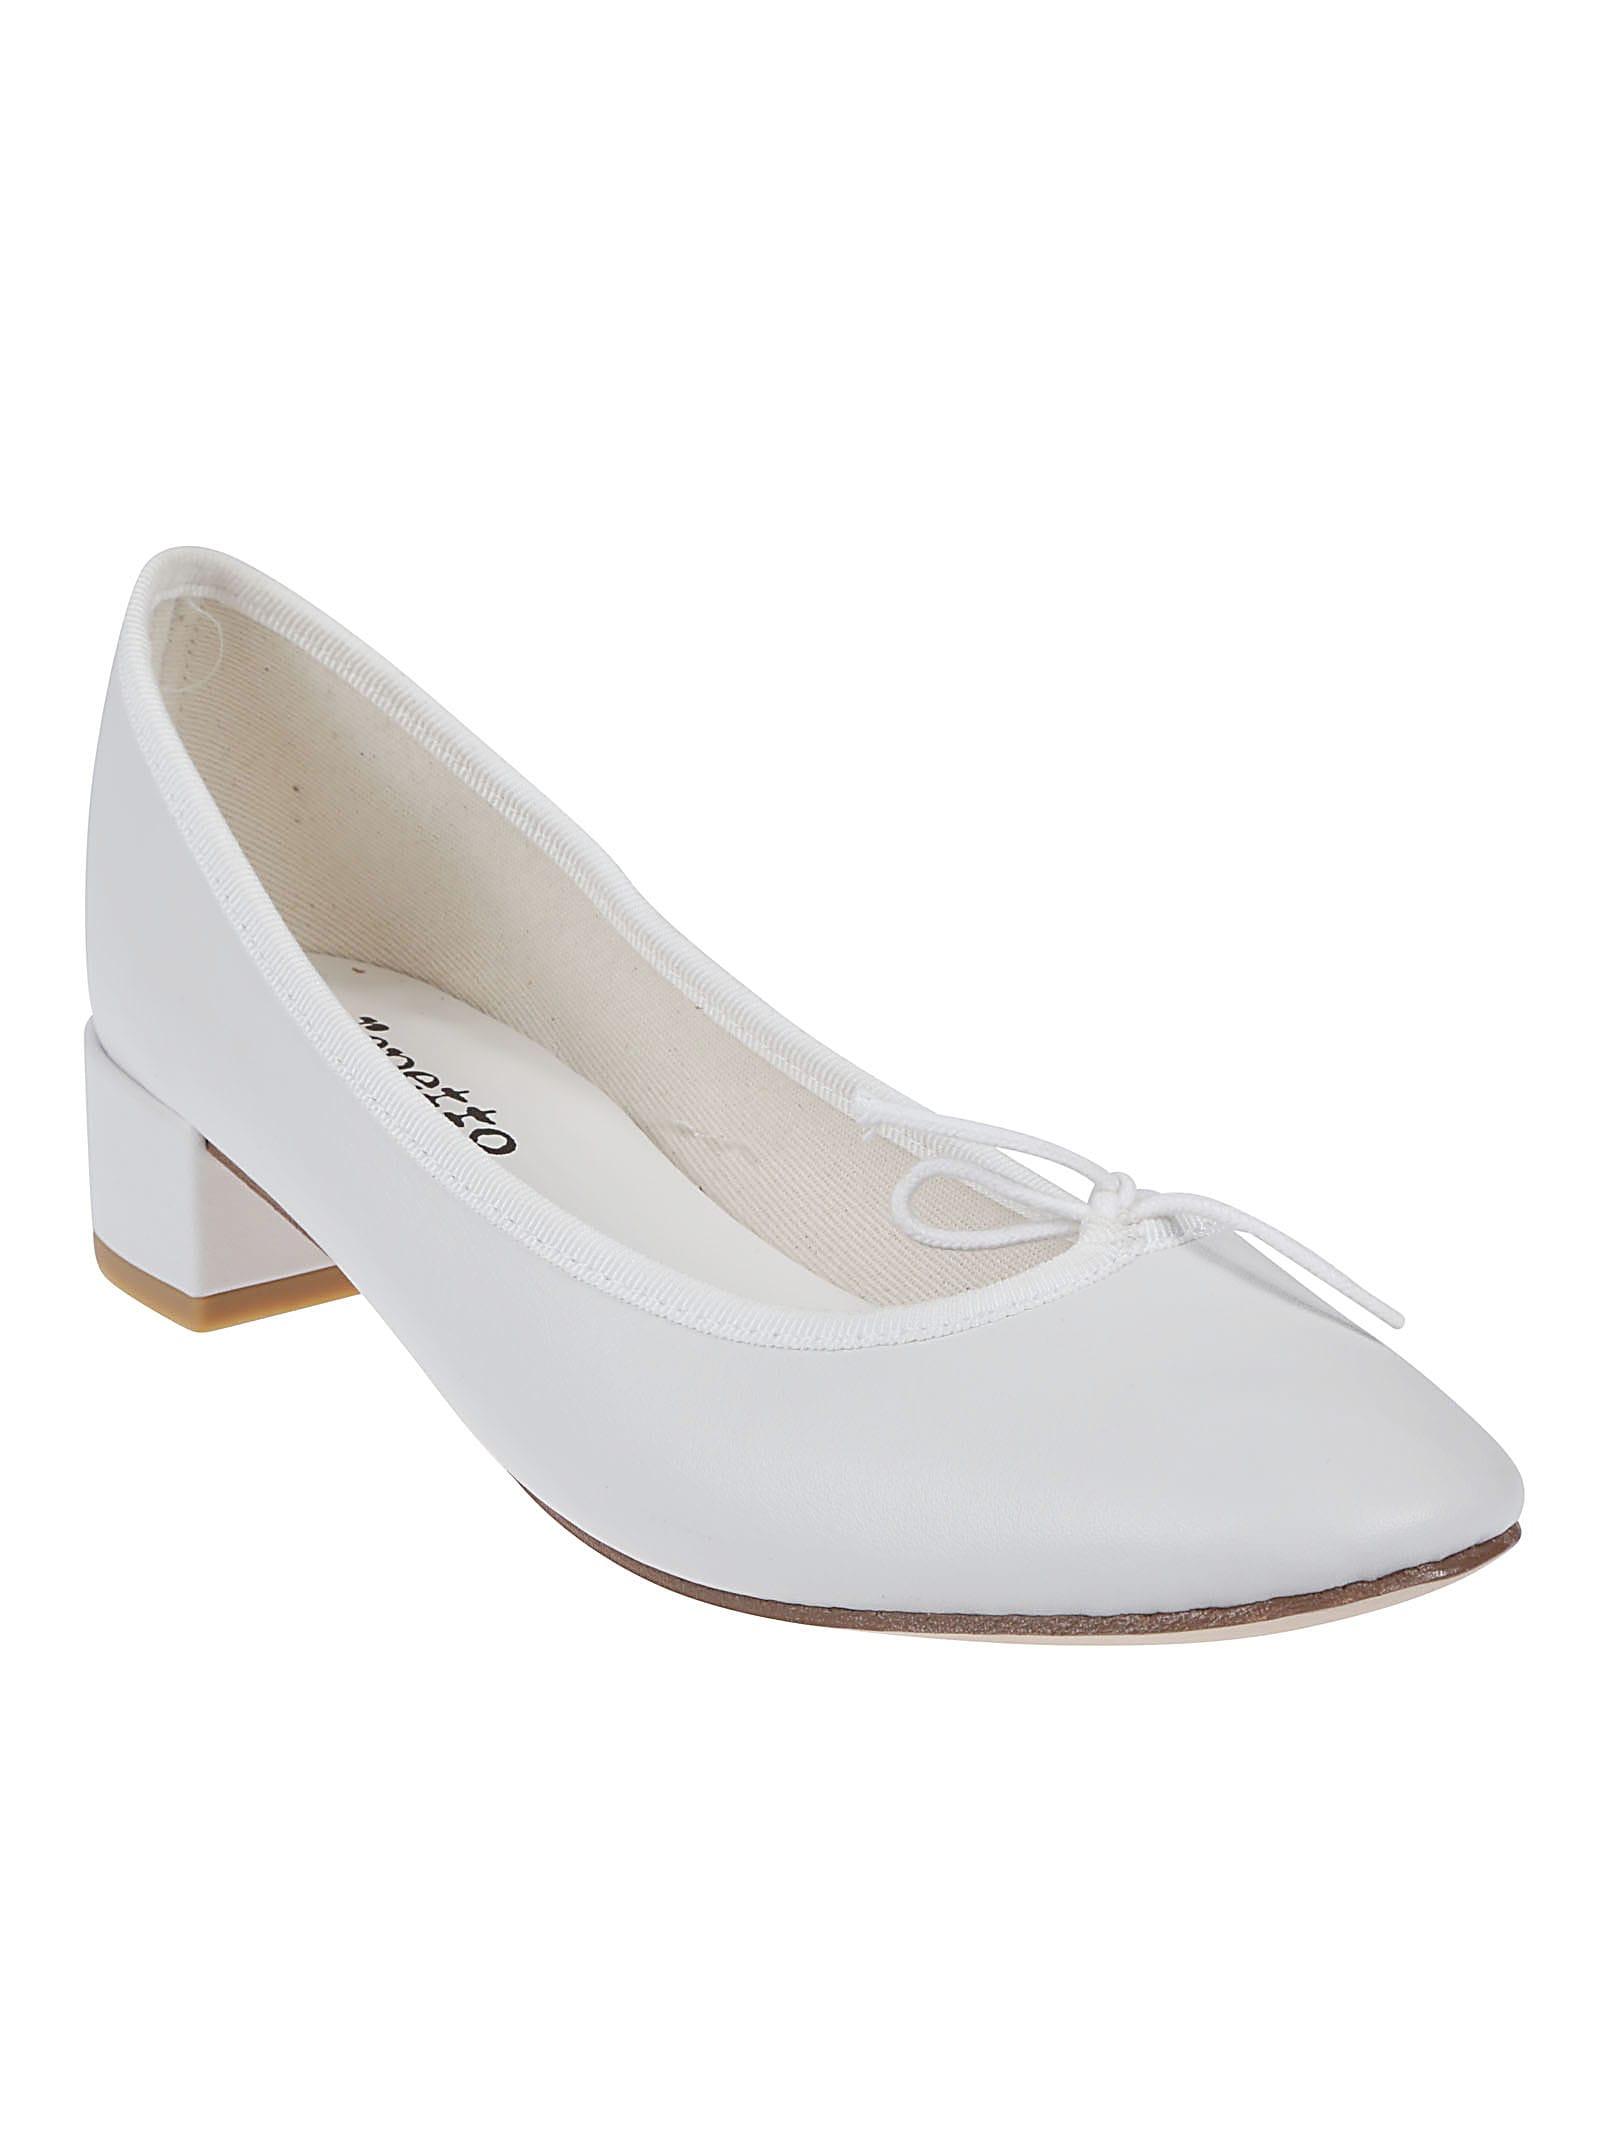 Repetto Camille Mythique Pumps In Blanc | ModeSens